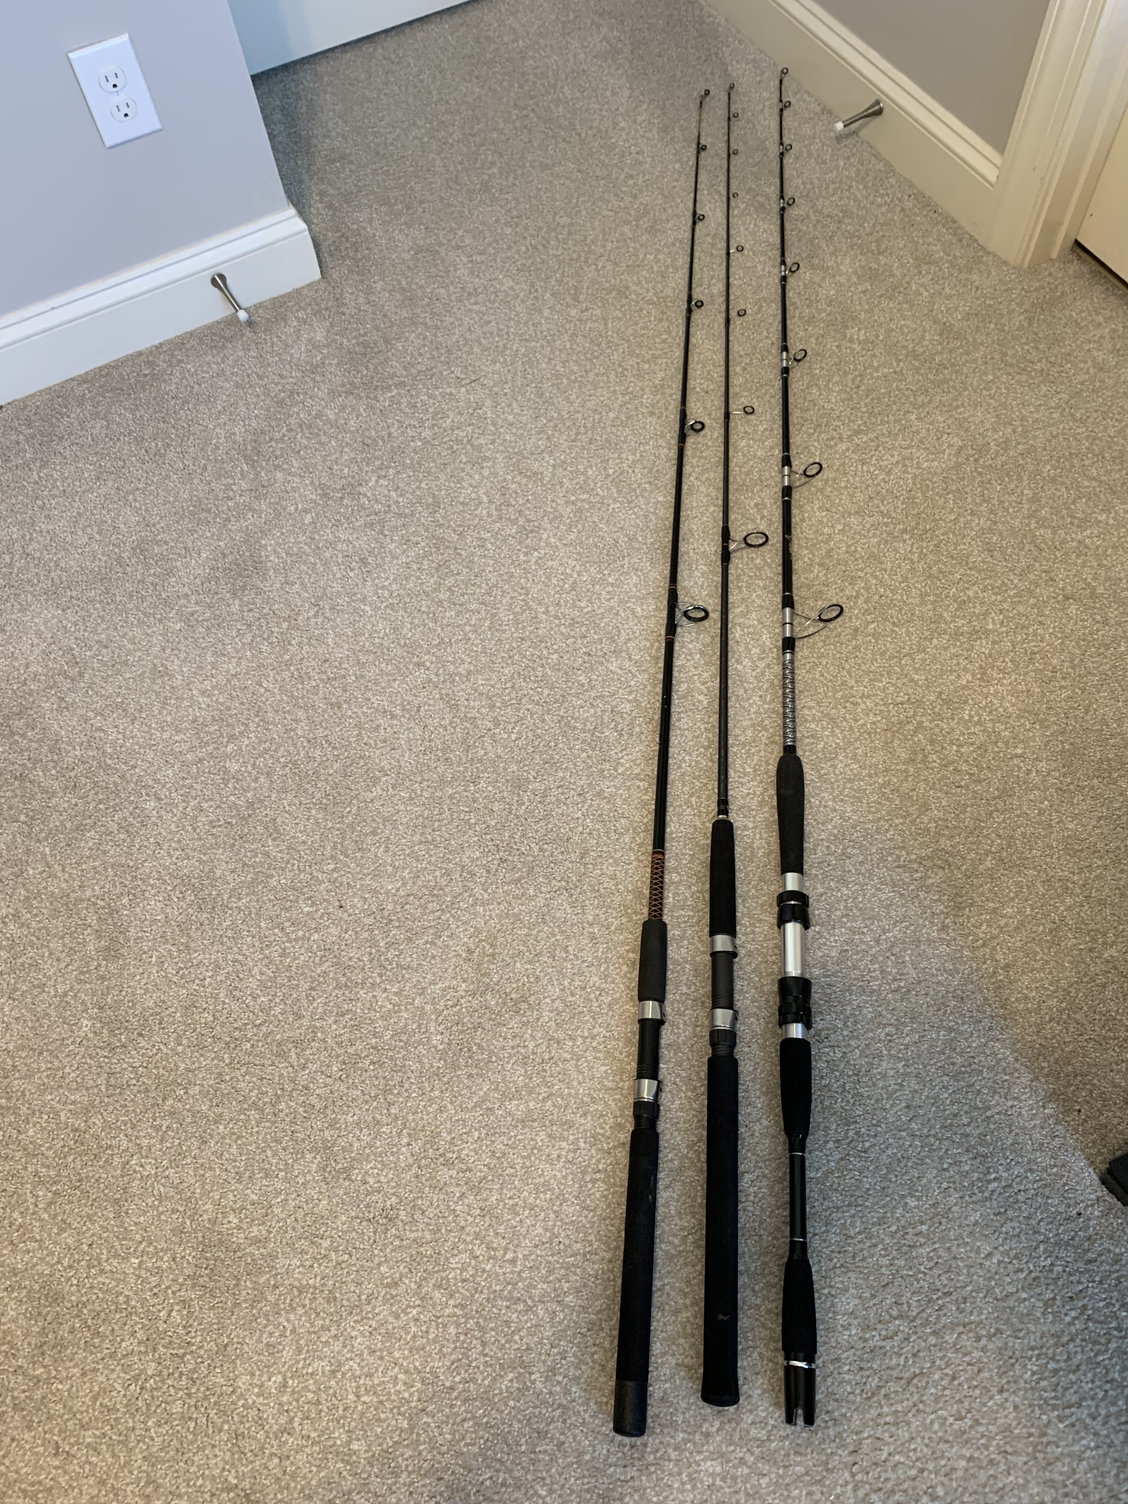 WTB: Ugly stick 113080 all roller rods - The Hull Truth - Boating and  Fishing Forum